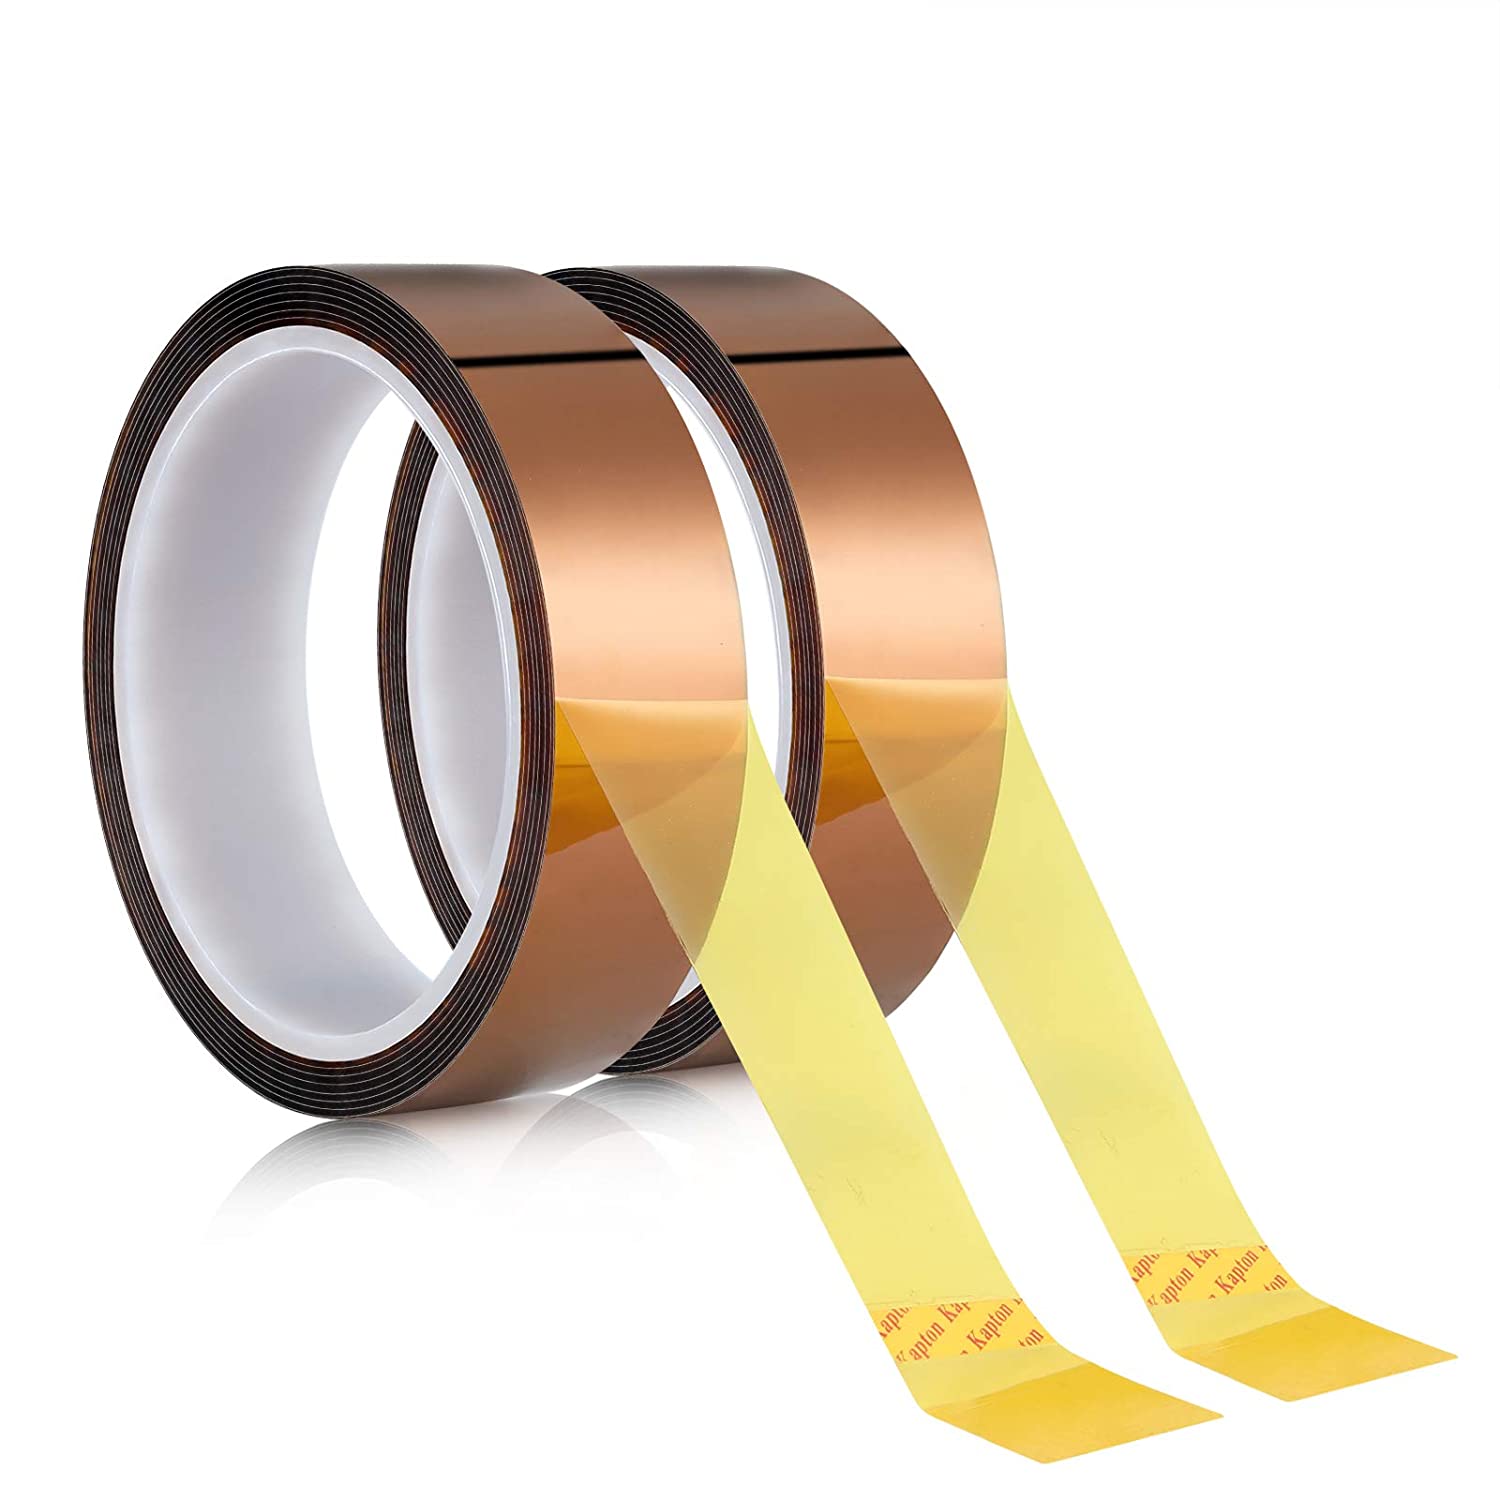 TAPEGO High Temperature Heat Resistant Tape for Heat Transfer 3D Printers High Temp Tape,Kapton Tape Electronics Polyimide Tape 1 inch 36yds